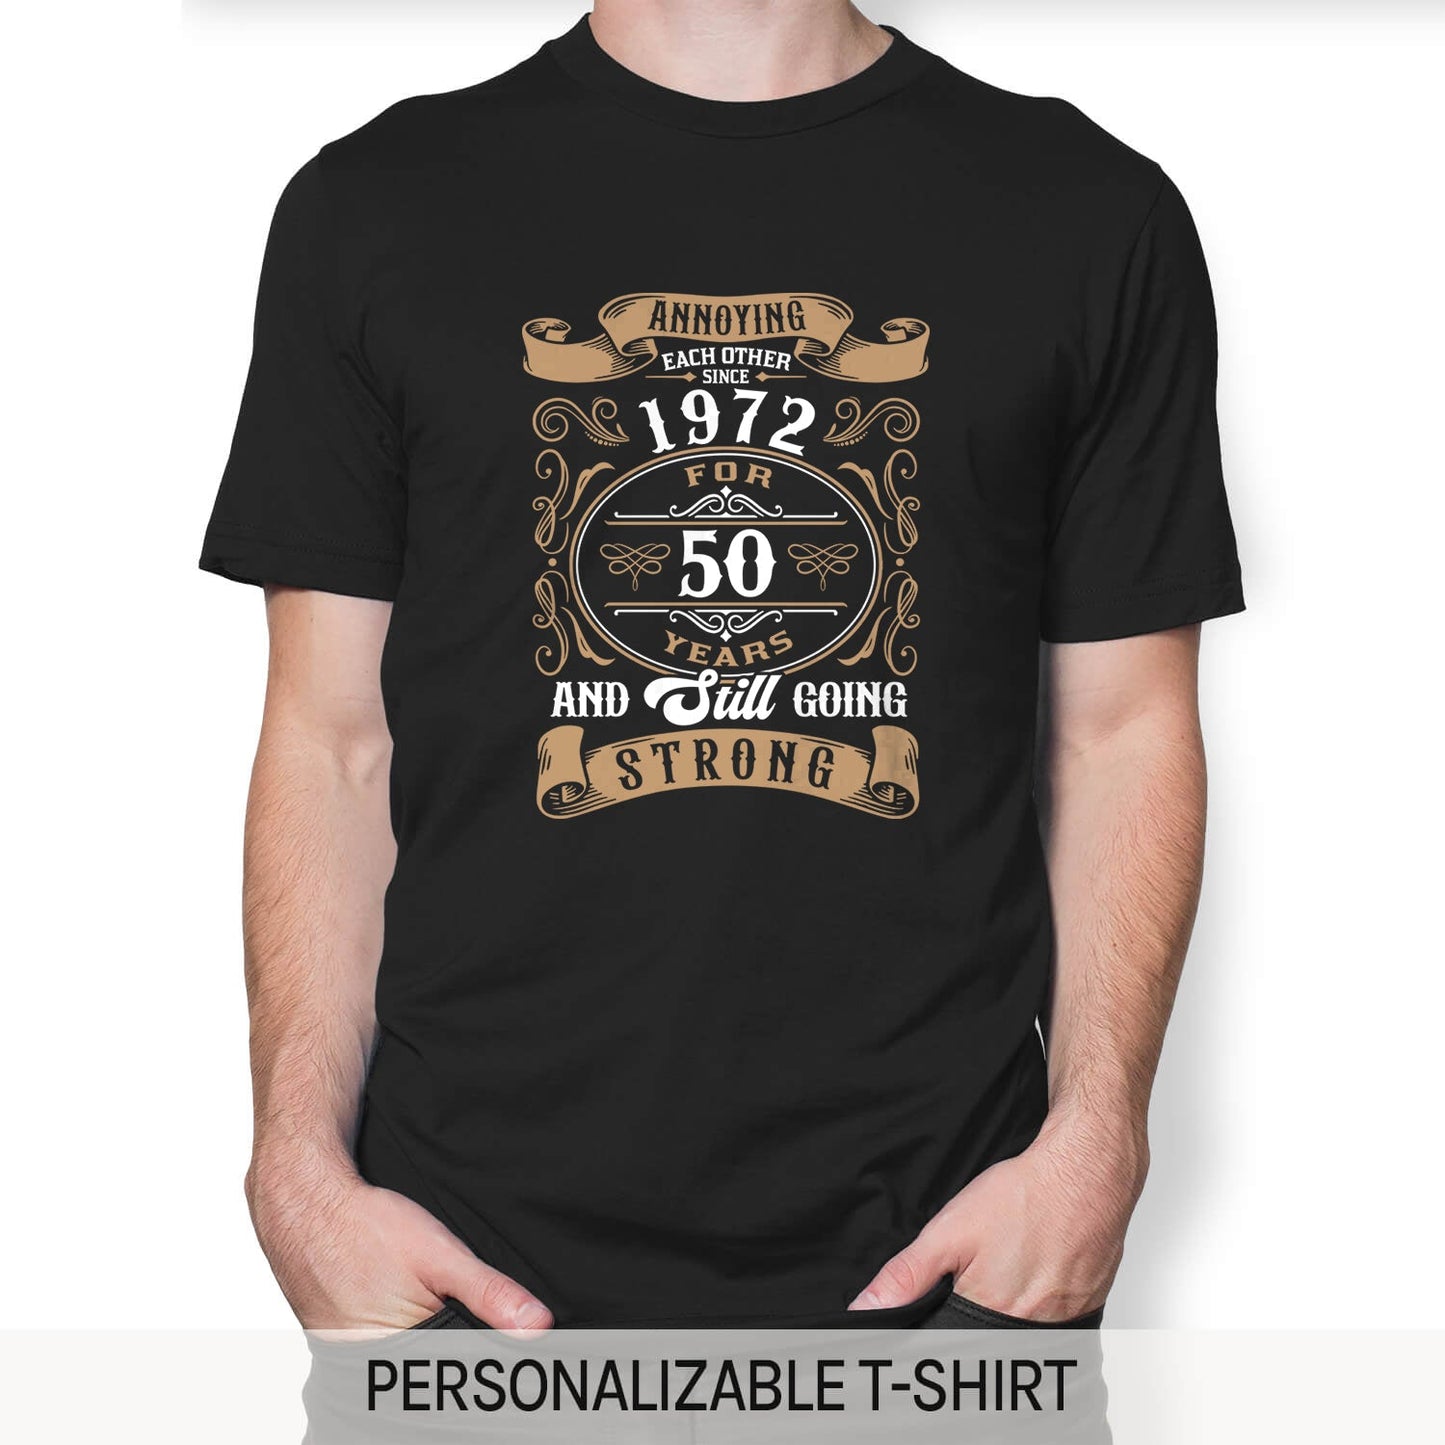 Annoying Each Other For 50 Years - Personalized 50 Year Anniversary gift for Husband or Wife - Custom Tshirt - MyMindfulGifts